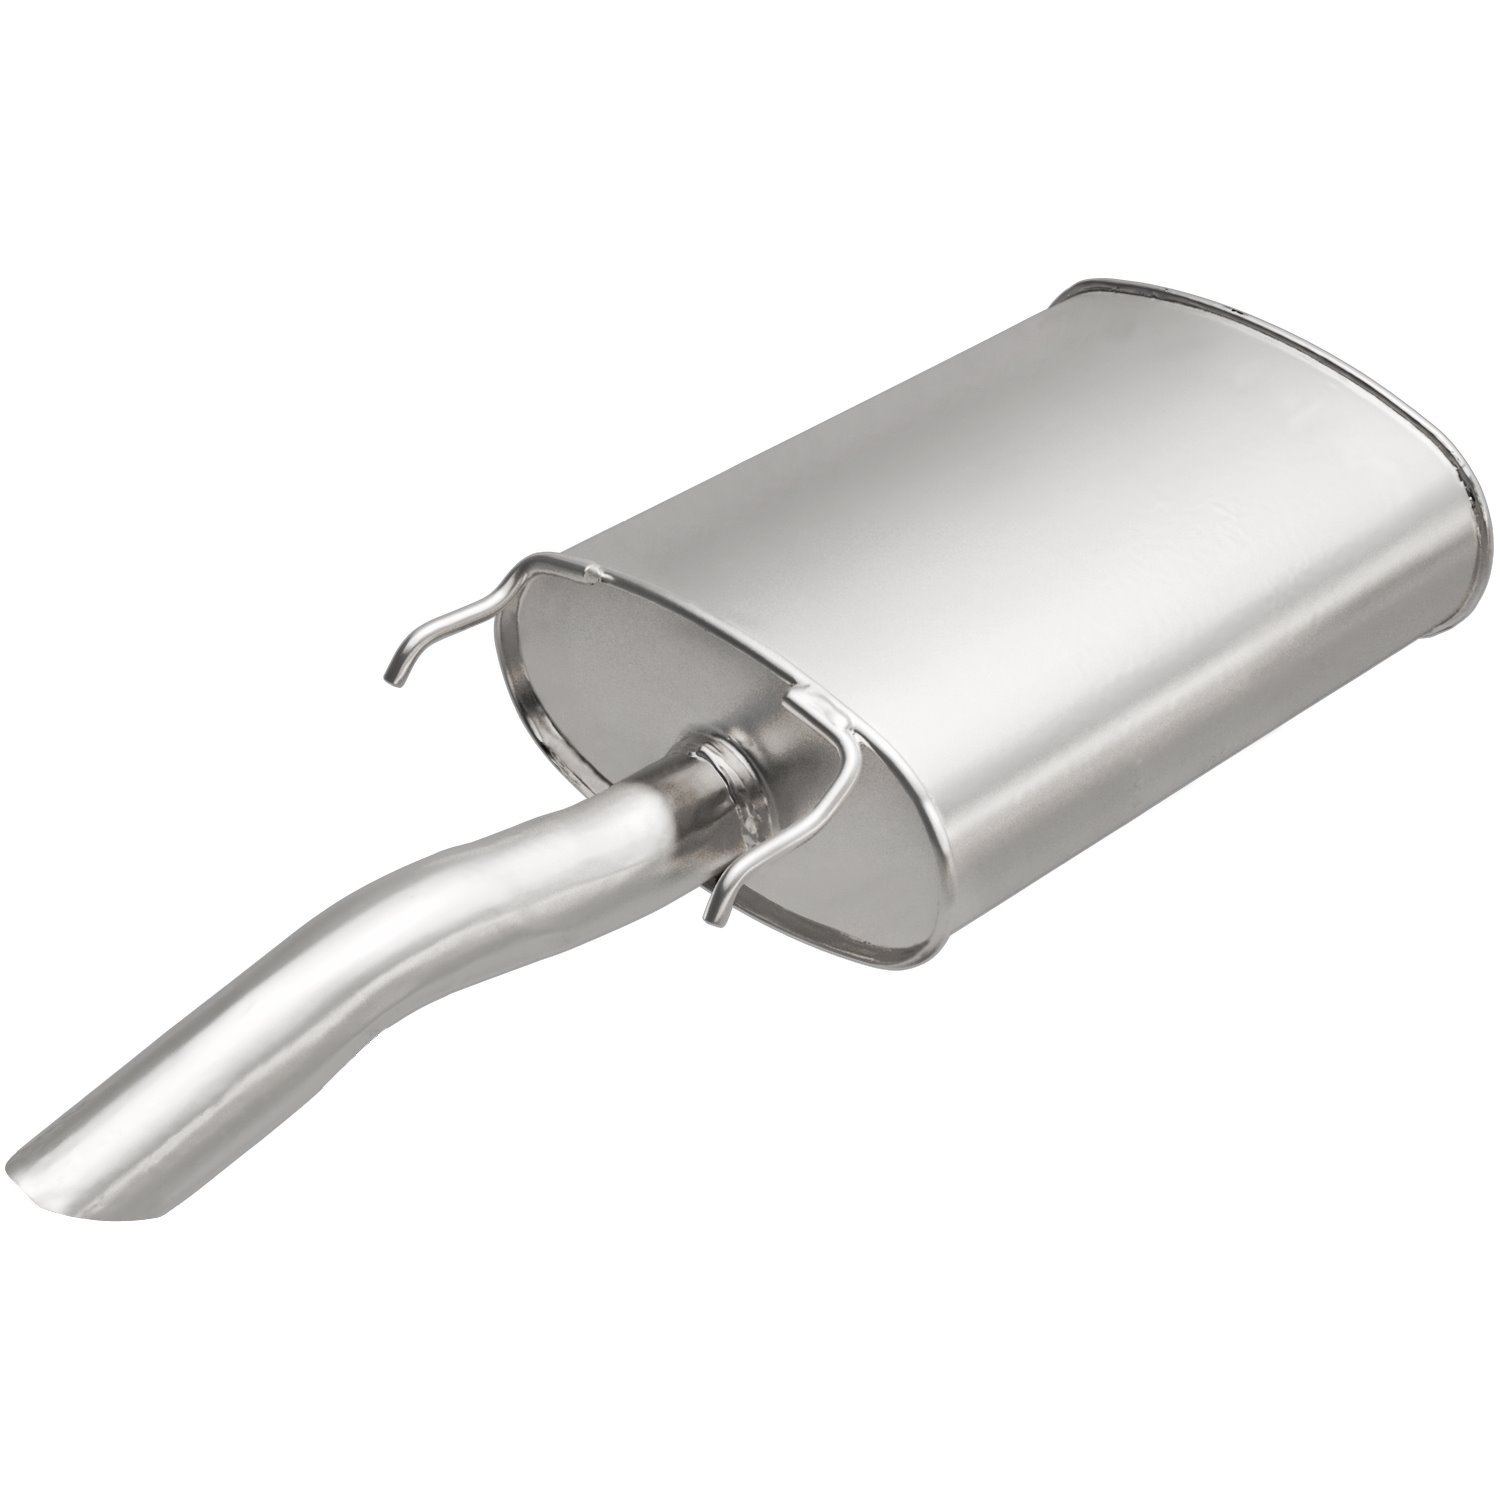 Direct-Fit Exhaust Muffler, 2000-2005 Chevy Impala/Monte Carlo